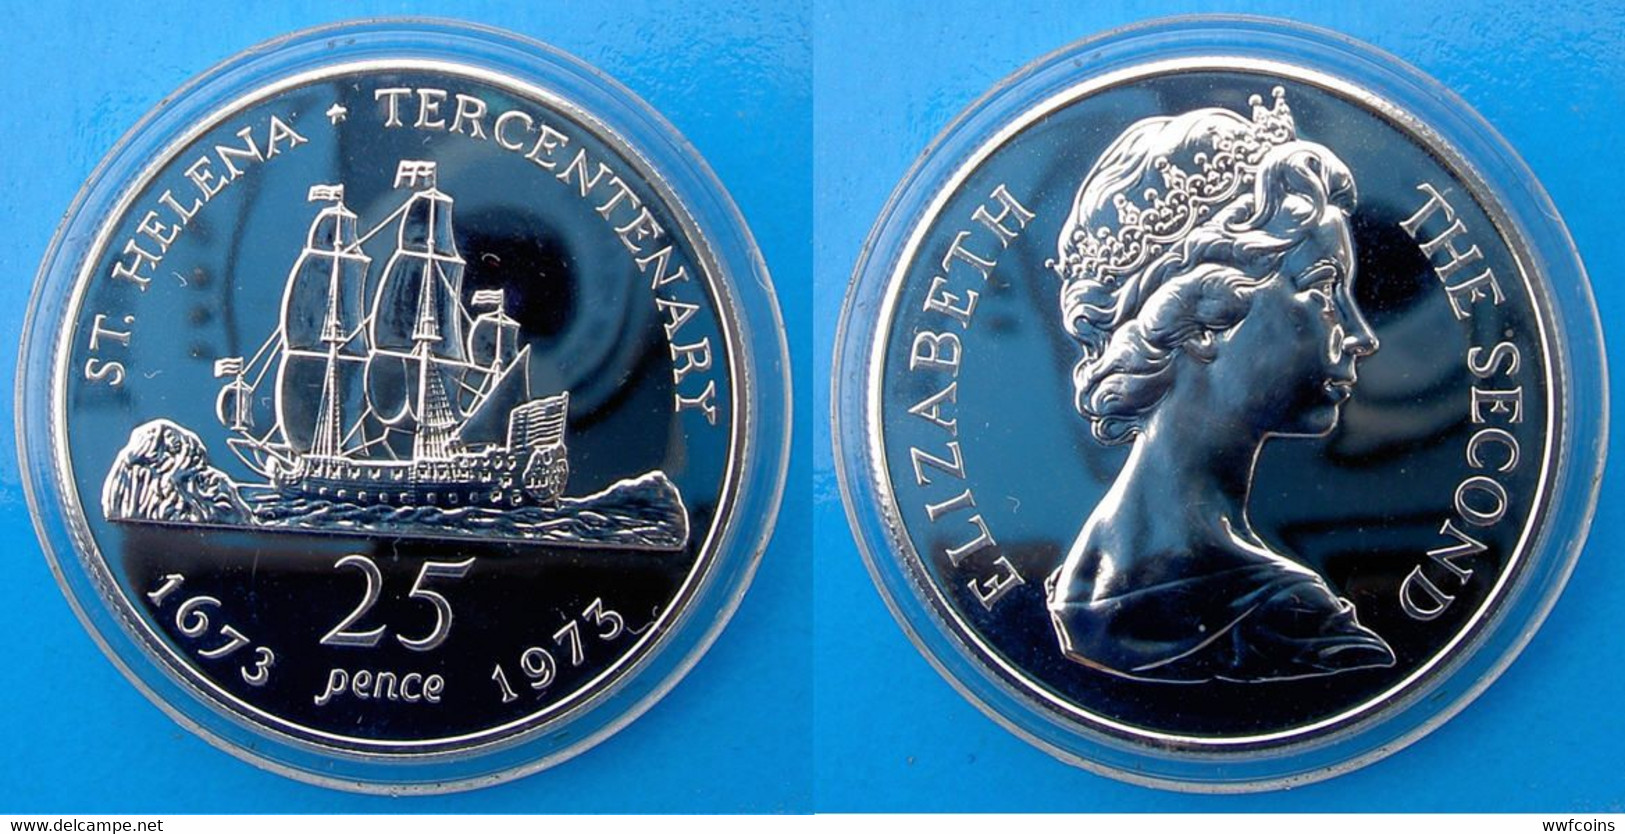 ST. HELENA 25 P 1973 ARGENTO VELIERO NAVE TERCENTENARY OF THE GRANTING OF THE ROYAL CHARTER PESO 28,20 TITOLO 925 CONSER - St. Helena